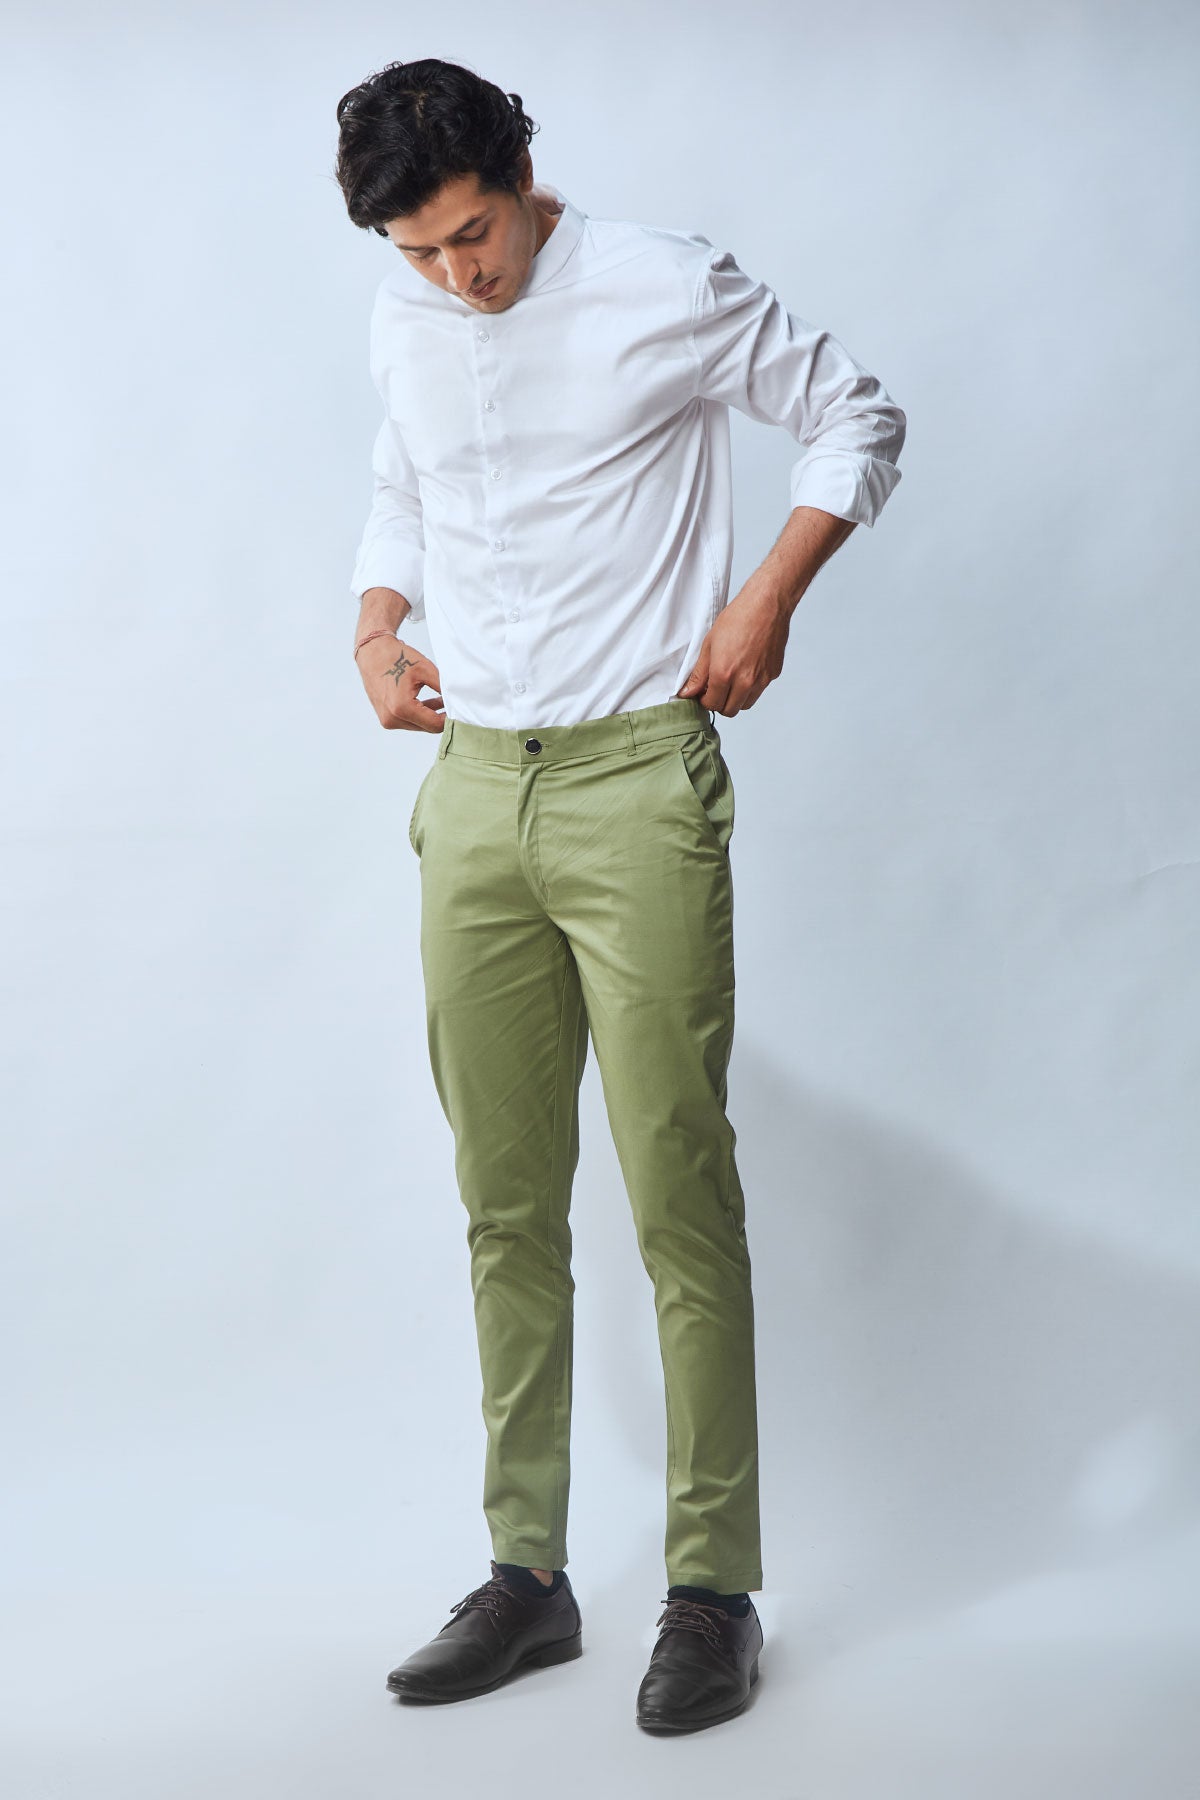 Black top olive green pants outfit | Green pants outfit, Olive green pants  outfit, Olive green pants